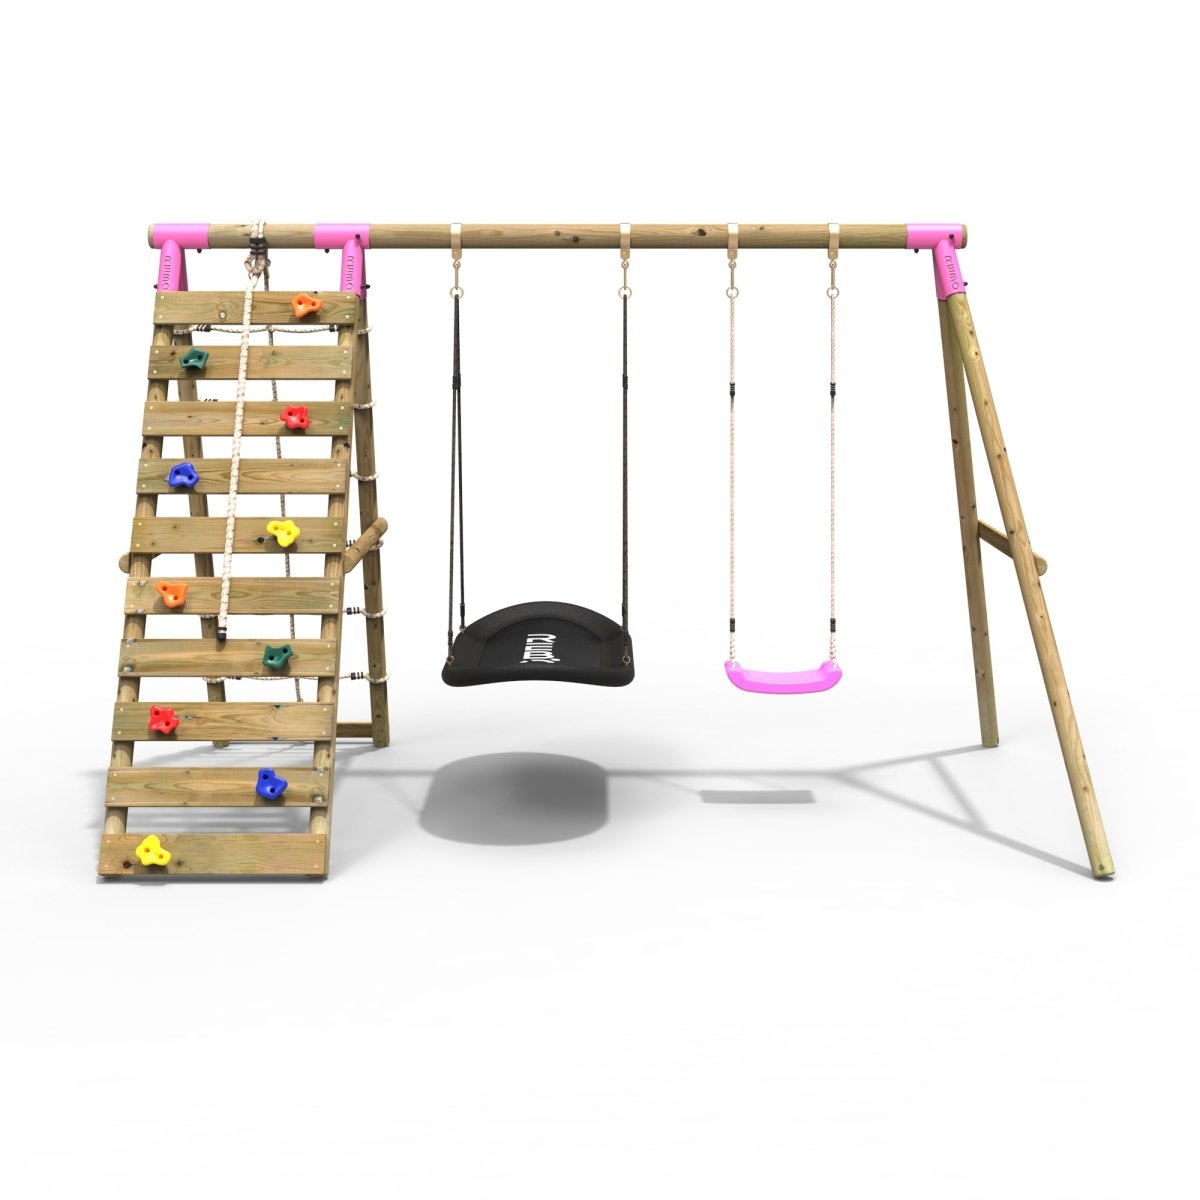 Rebo Wooden Swing Set with Up and Over Climbing Wall - Sage Pink